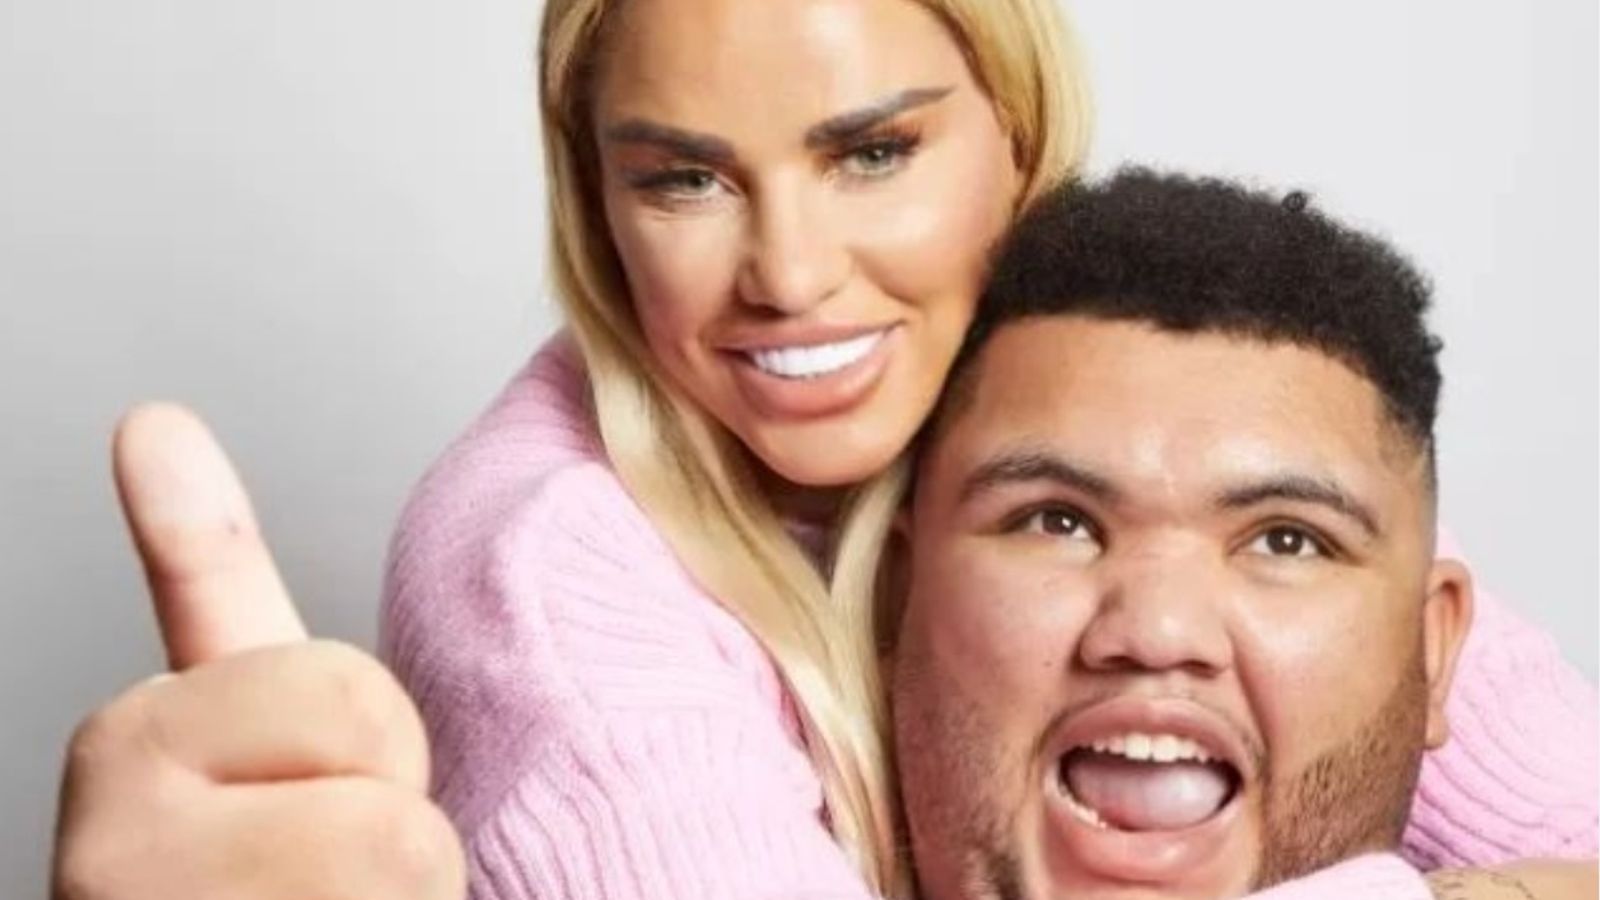 Katie Price 'shocked and upset' by 'disgusting' remarks made about son in police WhatsApp group